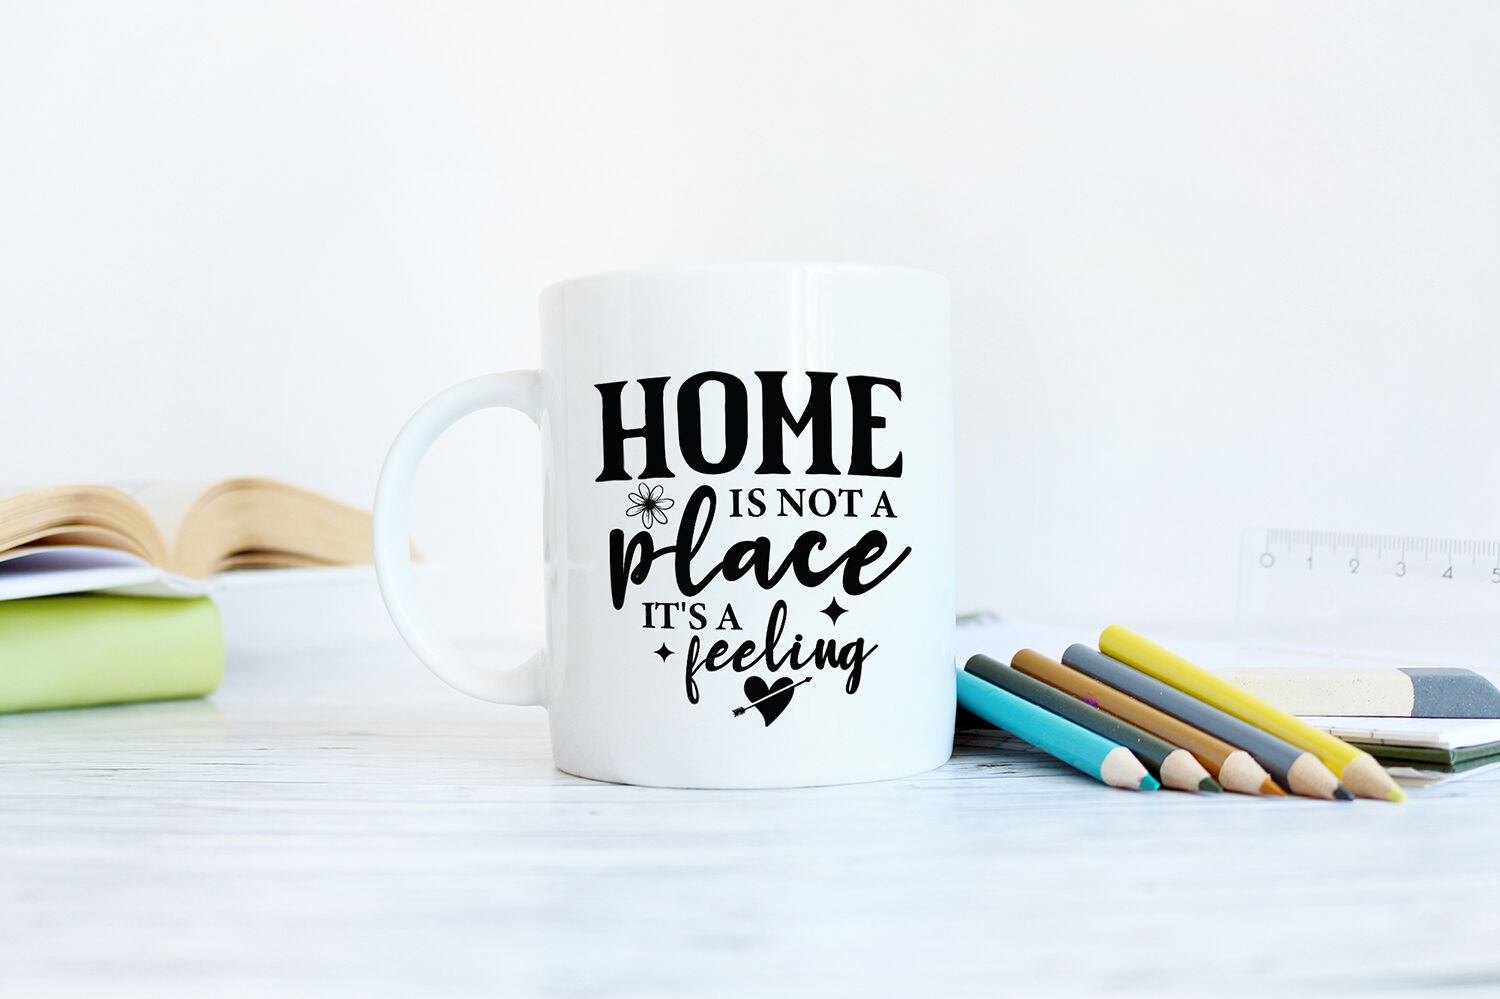 Download Home Svg Home Feeling Svg Family Cut File Family Quote Svg Home Place Svg Home Is Not A Place It S A Feeling Svg Home Cut File Craft Supplies Tools Collage Sheets